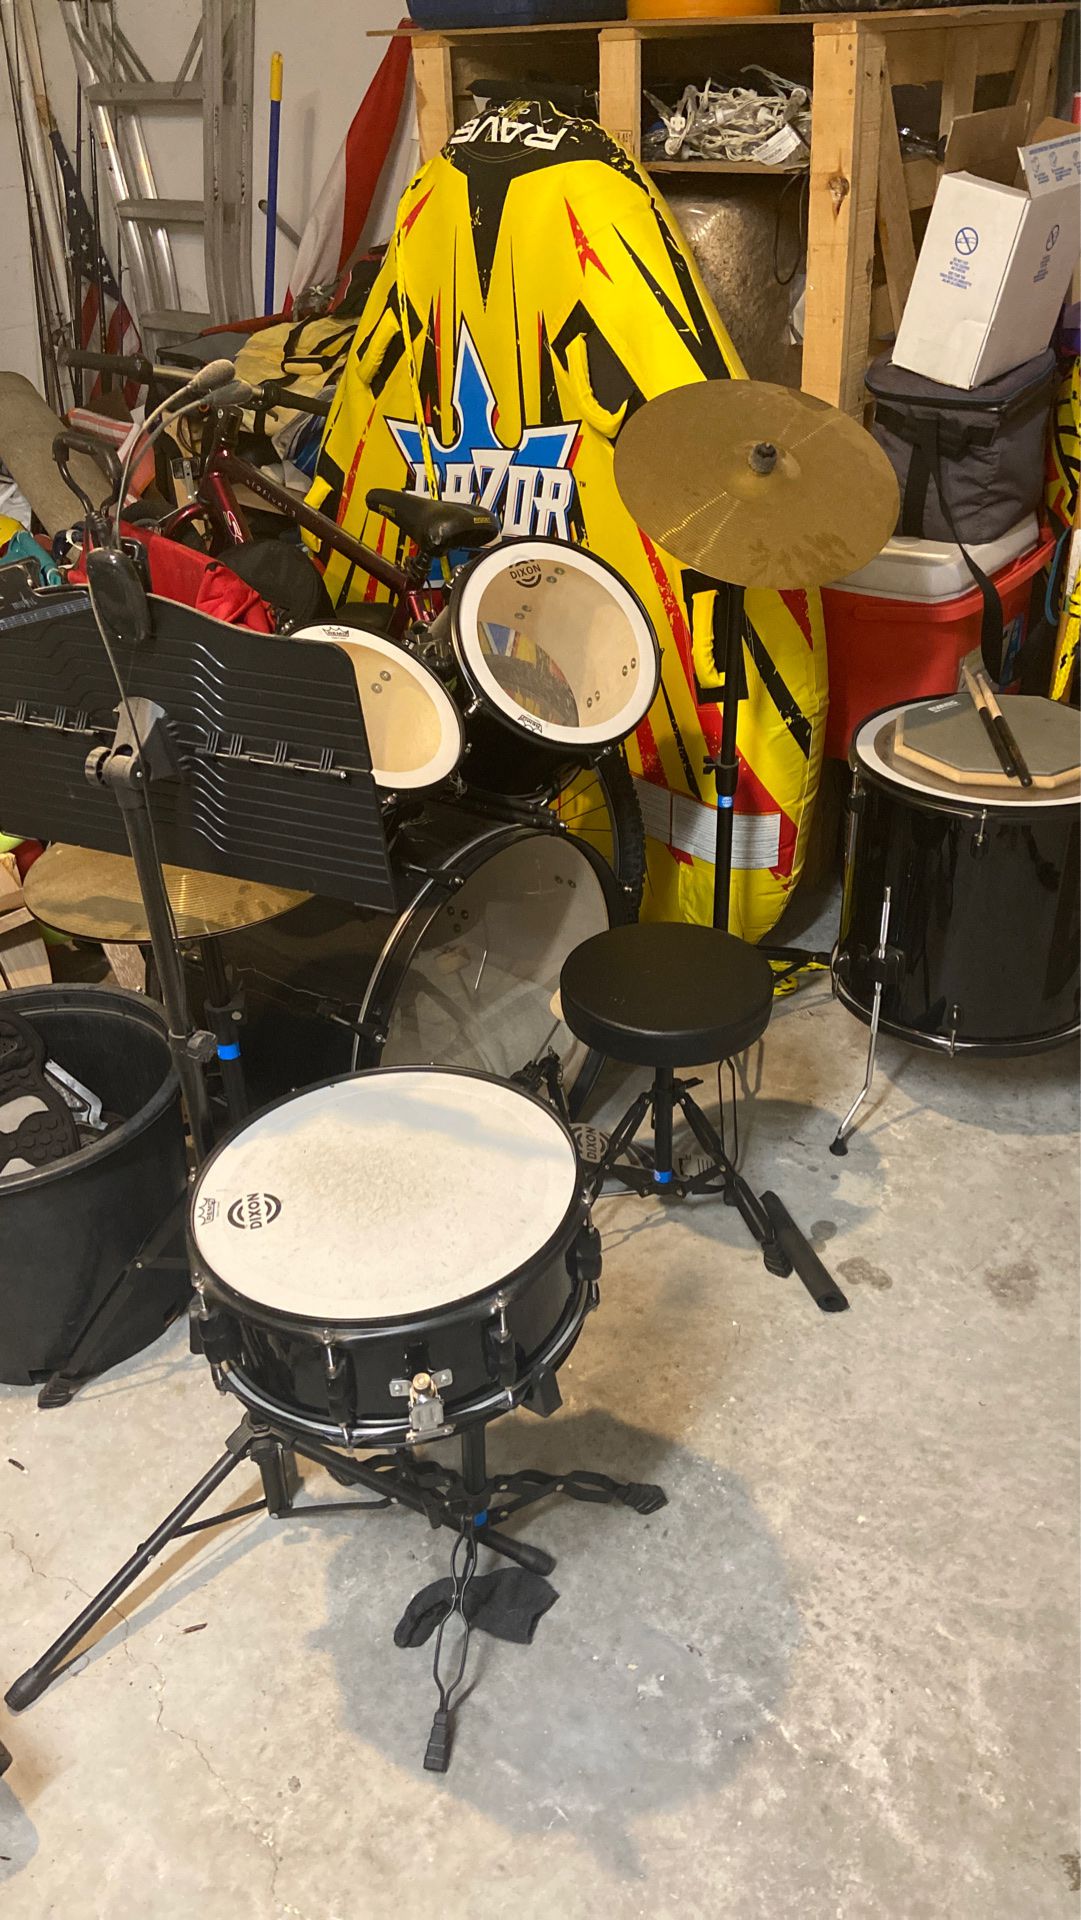 Drum set with music stand, sticks and a practice pad